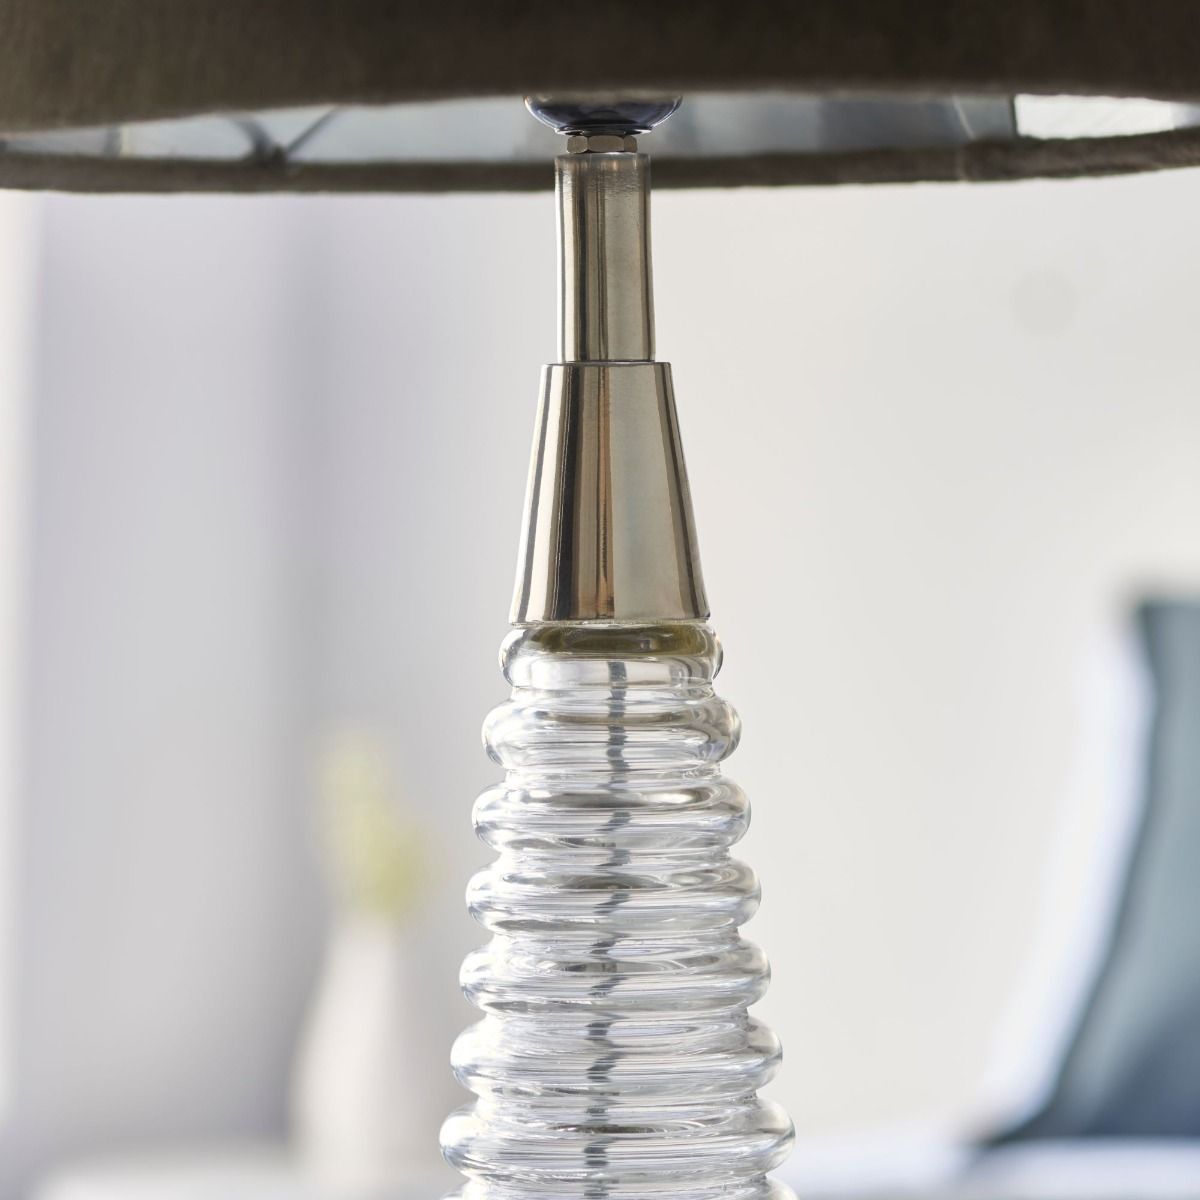 Naia Nickel & Taupe Glass Table Lamp